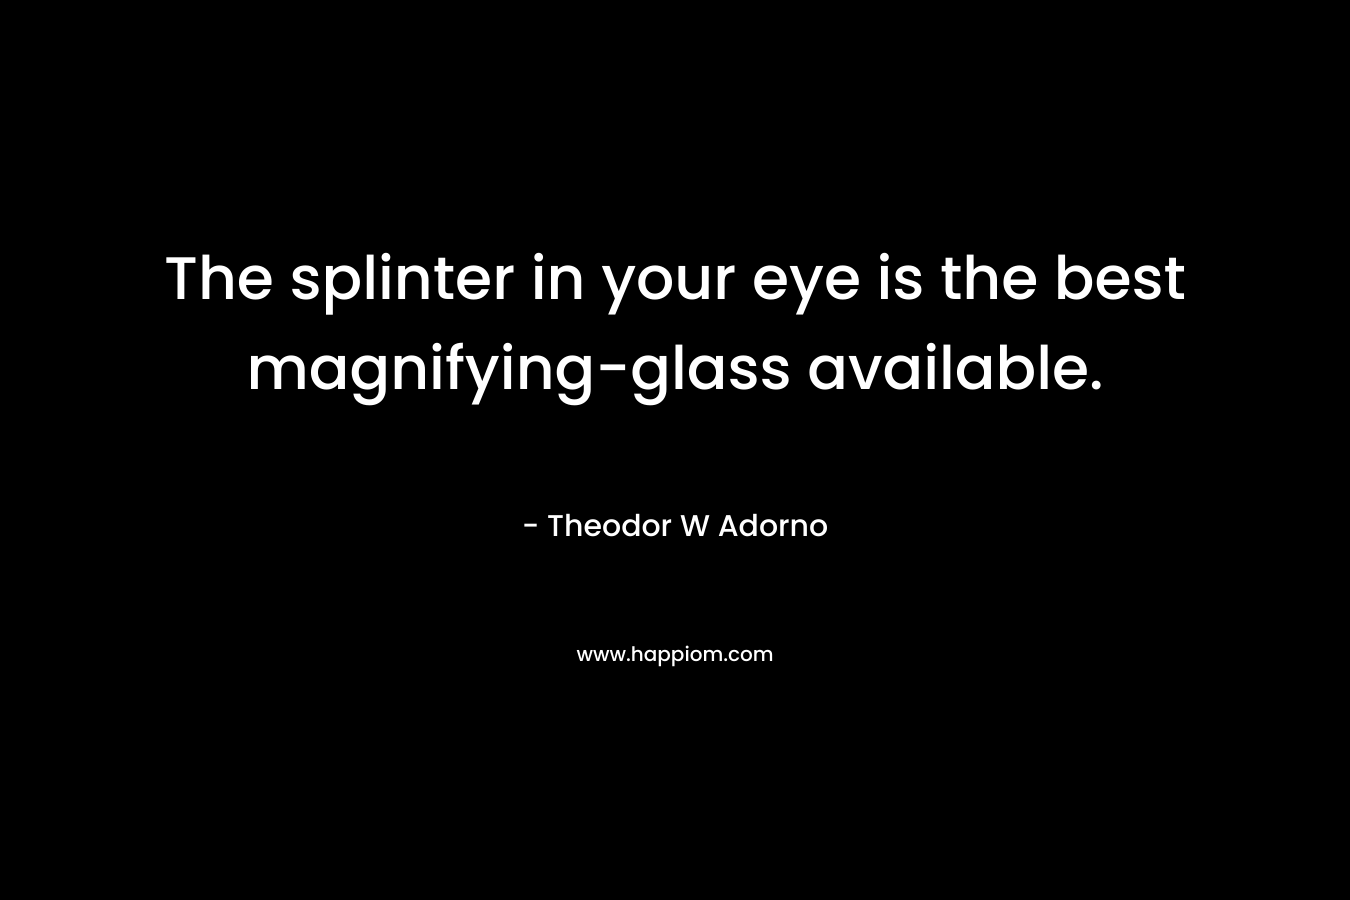 The splinter in your eye is the best magnifying-glass available. – Theodor W Adorno